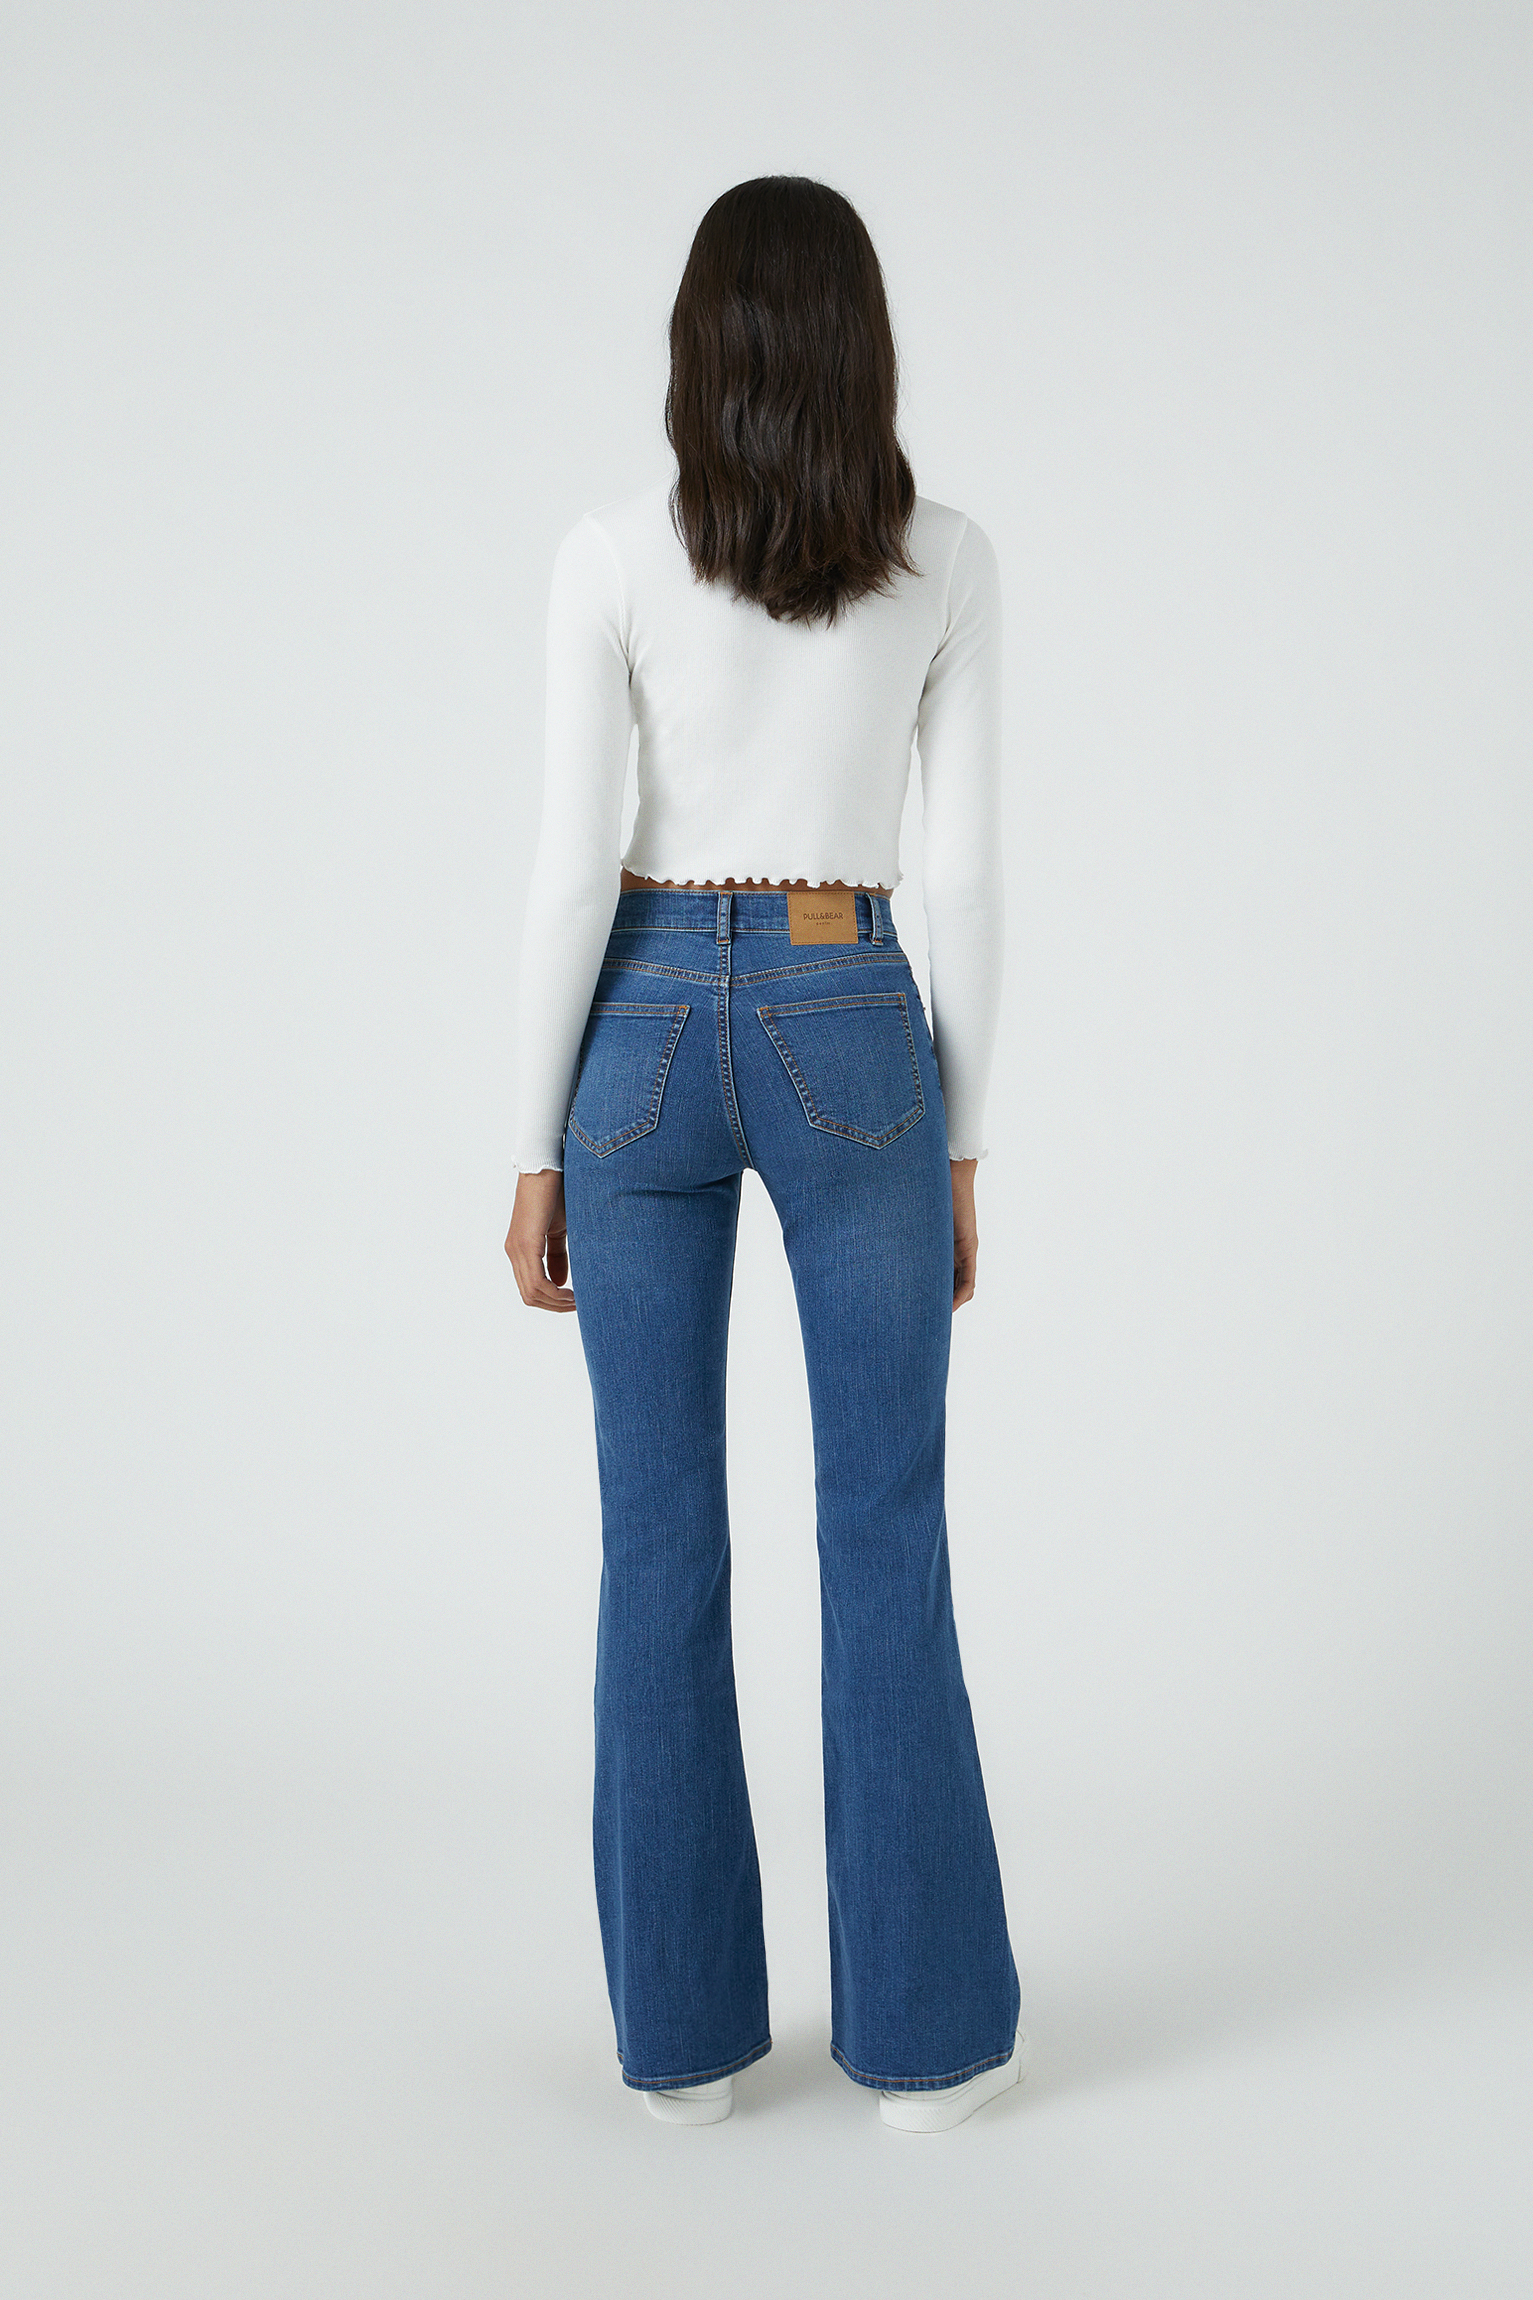 pull and bear flared pants